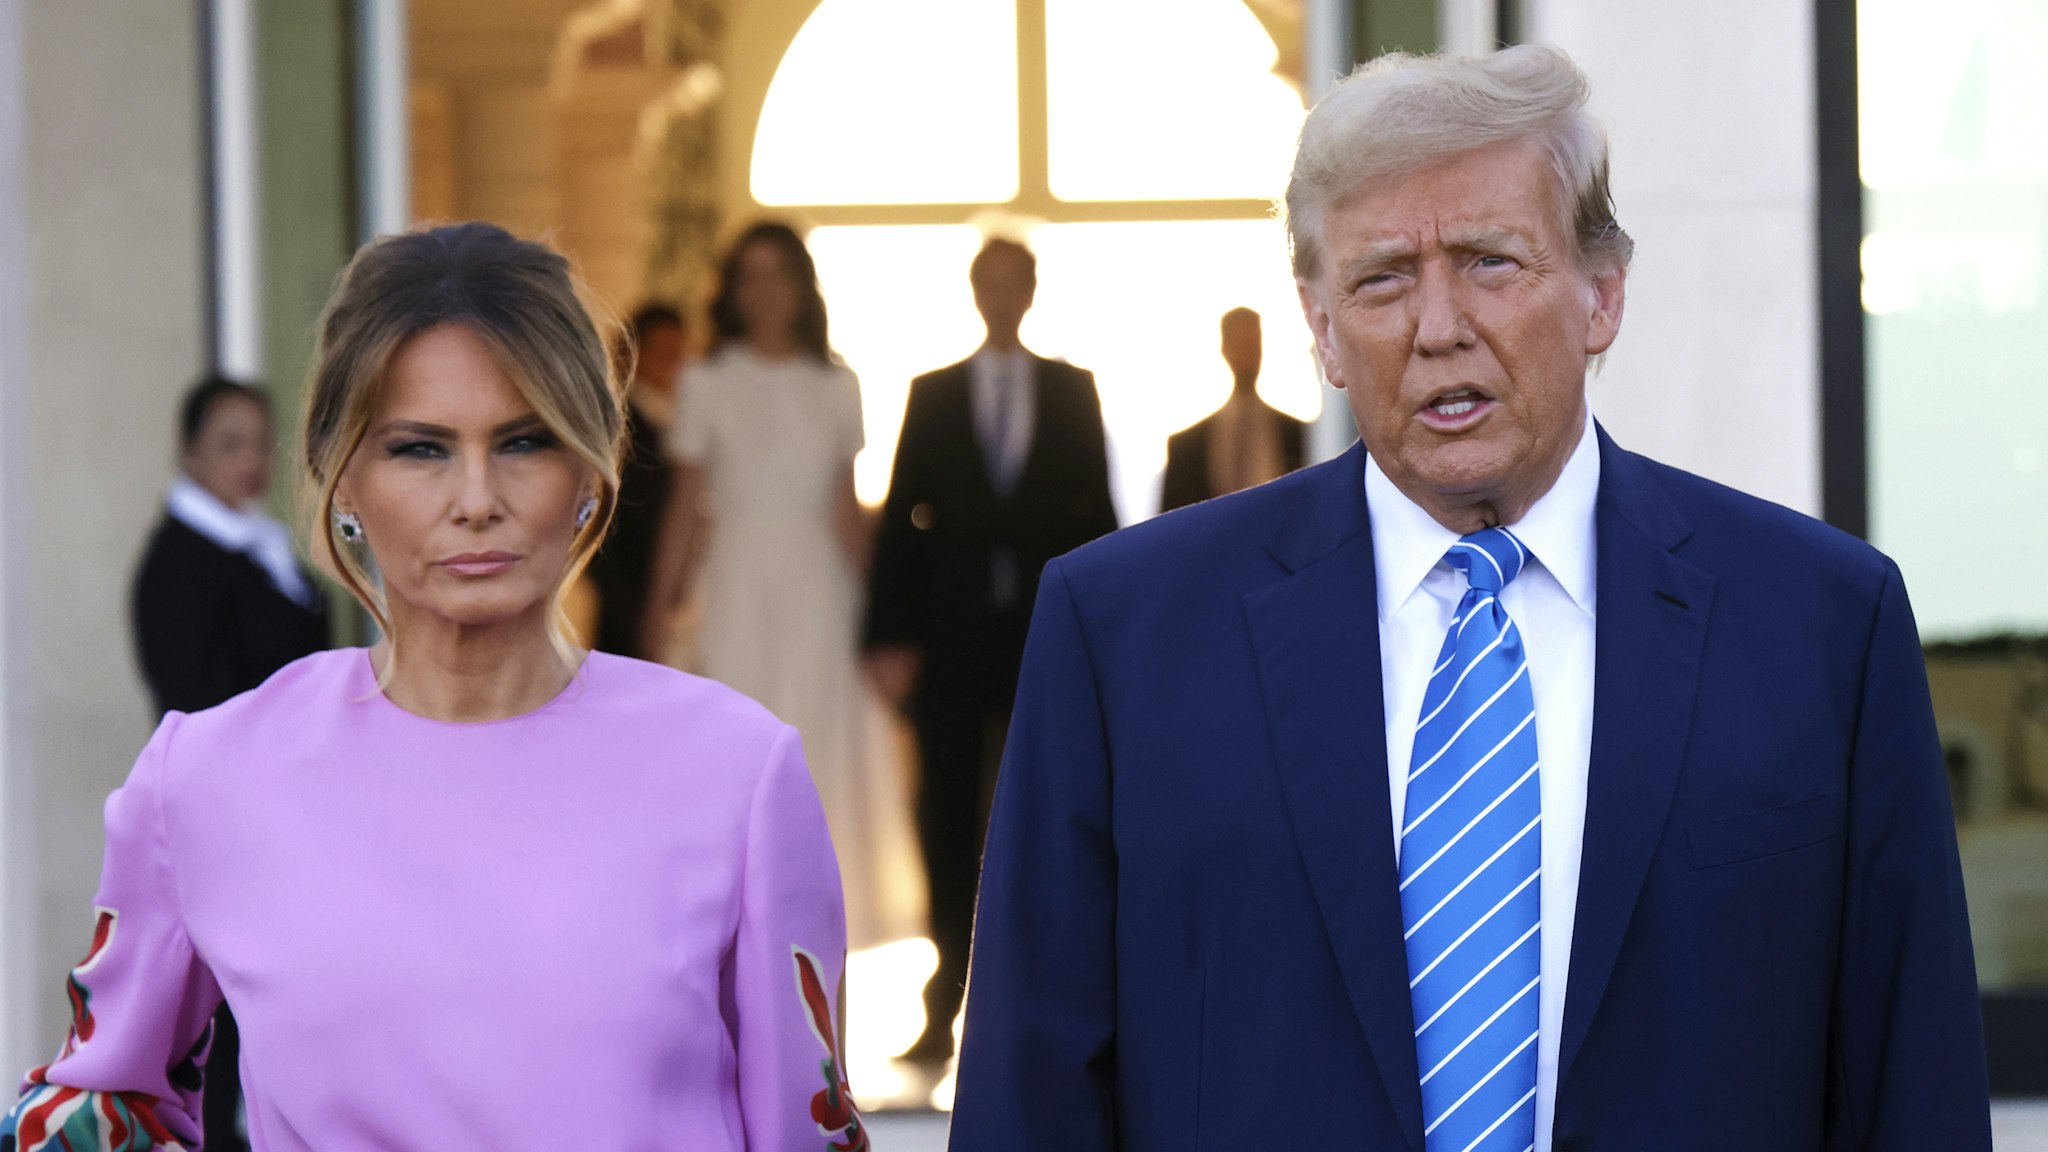 PALM BEACH, FLORIDA - APRIL 6: Republican presidential candidate, former US President Donald Trump, arrives at the home of billionaire investor John Paulson, with former first lady Melania Trump, on April 6, 2024 in Palm Beach, Florida. Donald Trump's campaign is expecting to raise more than 40 million dollars when major donors gather for his biggest fundraiser yet. The event is billed as the "Inaugural Leadership Dinner".